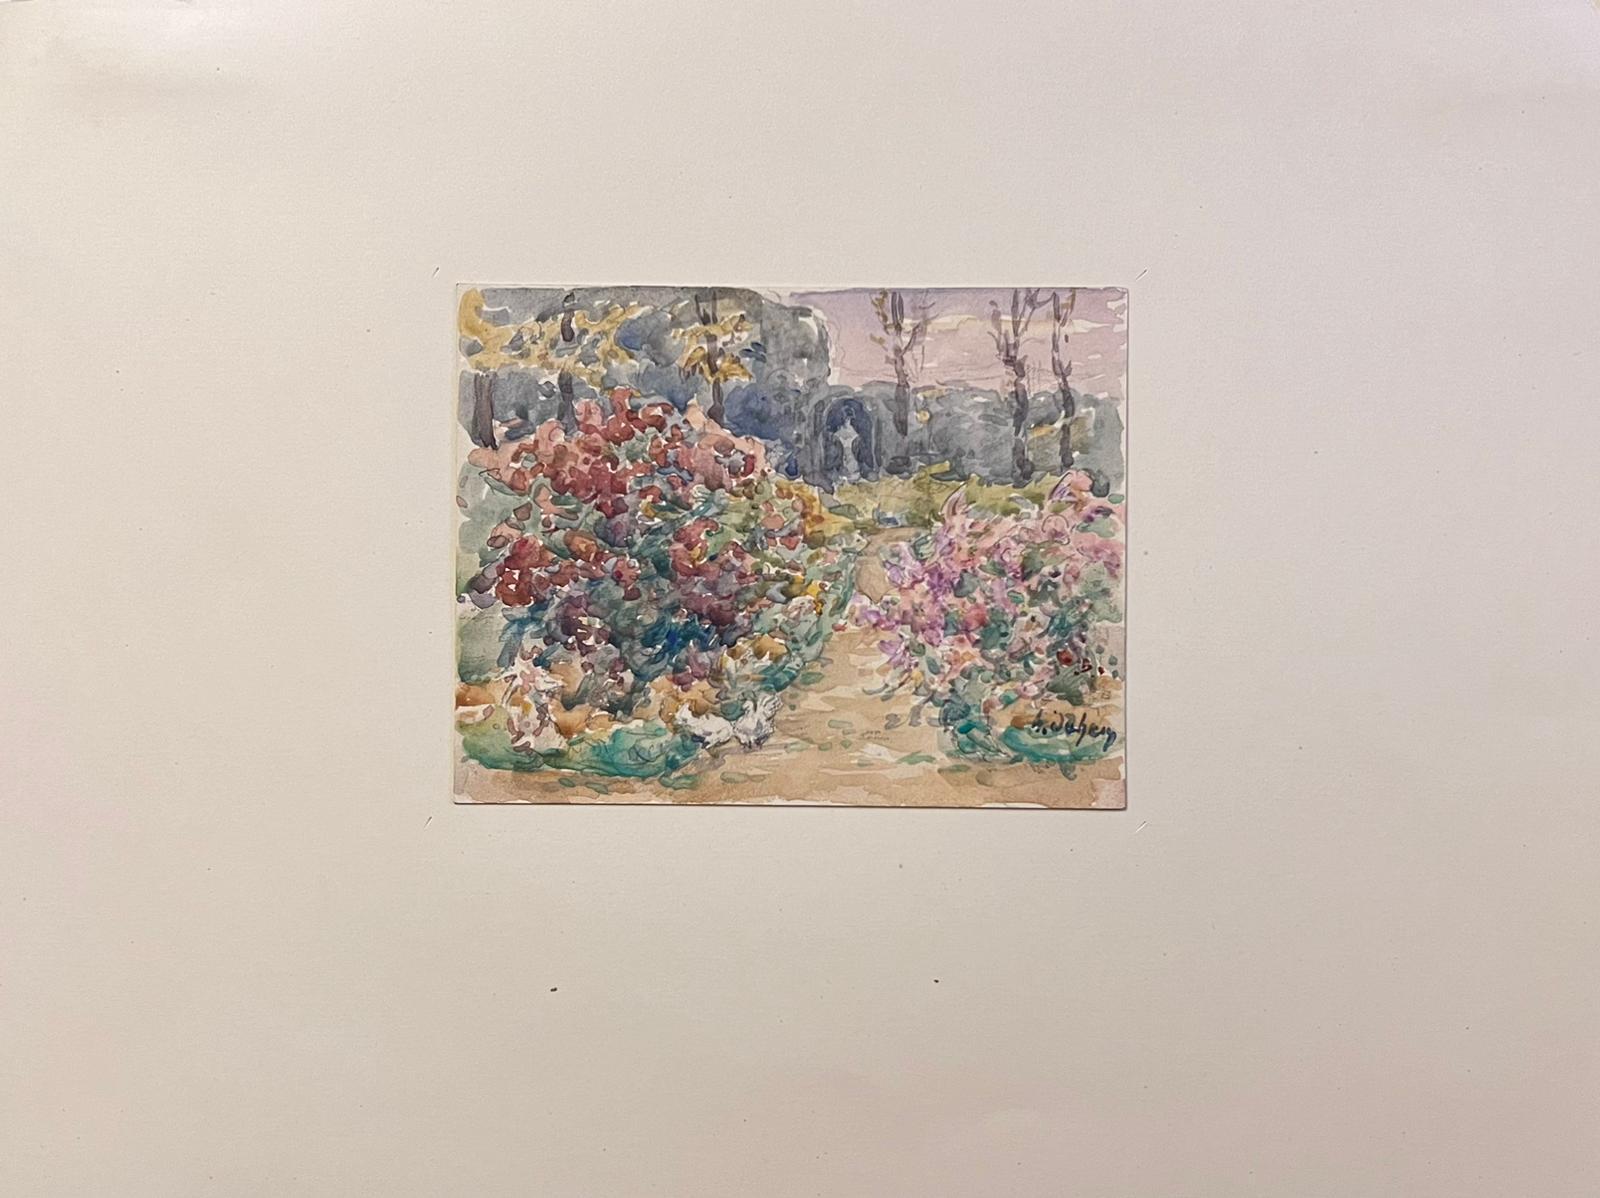 The artist: 
Henri Aime Duhem (1860-1941) French *see notes below, signed 

Title: The Flower Garden

Medium:  
gouache on paper, loosely laid over card, unframed

card: 9.75 x 12.75 inches
painting: 4 x 5.5 inches

Provenance: 
private collection